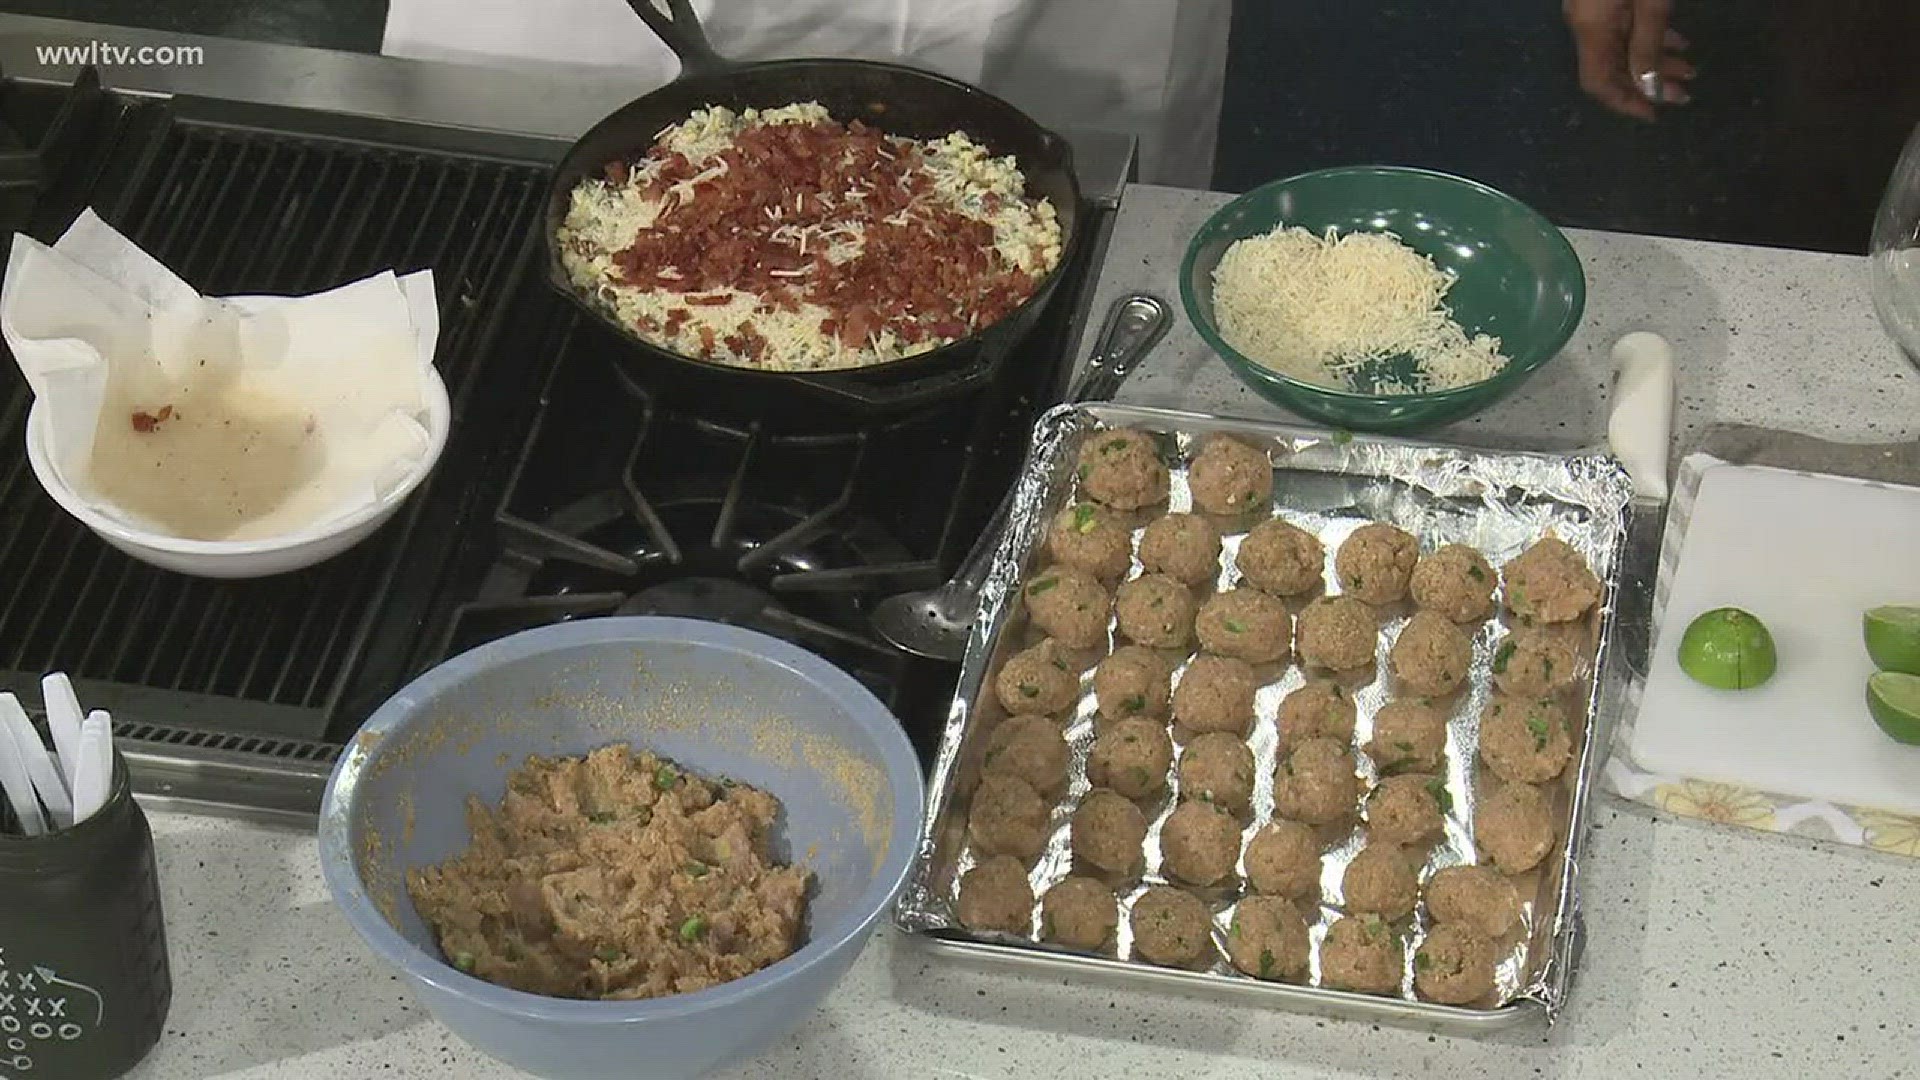 Chef Kevin Belton shares some perfect recipes whether you are tailgating at the dome or at home this weekend.